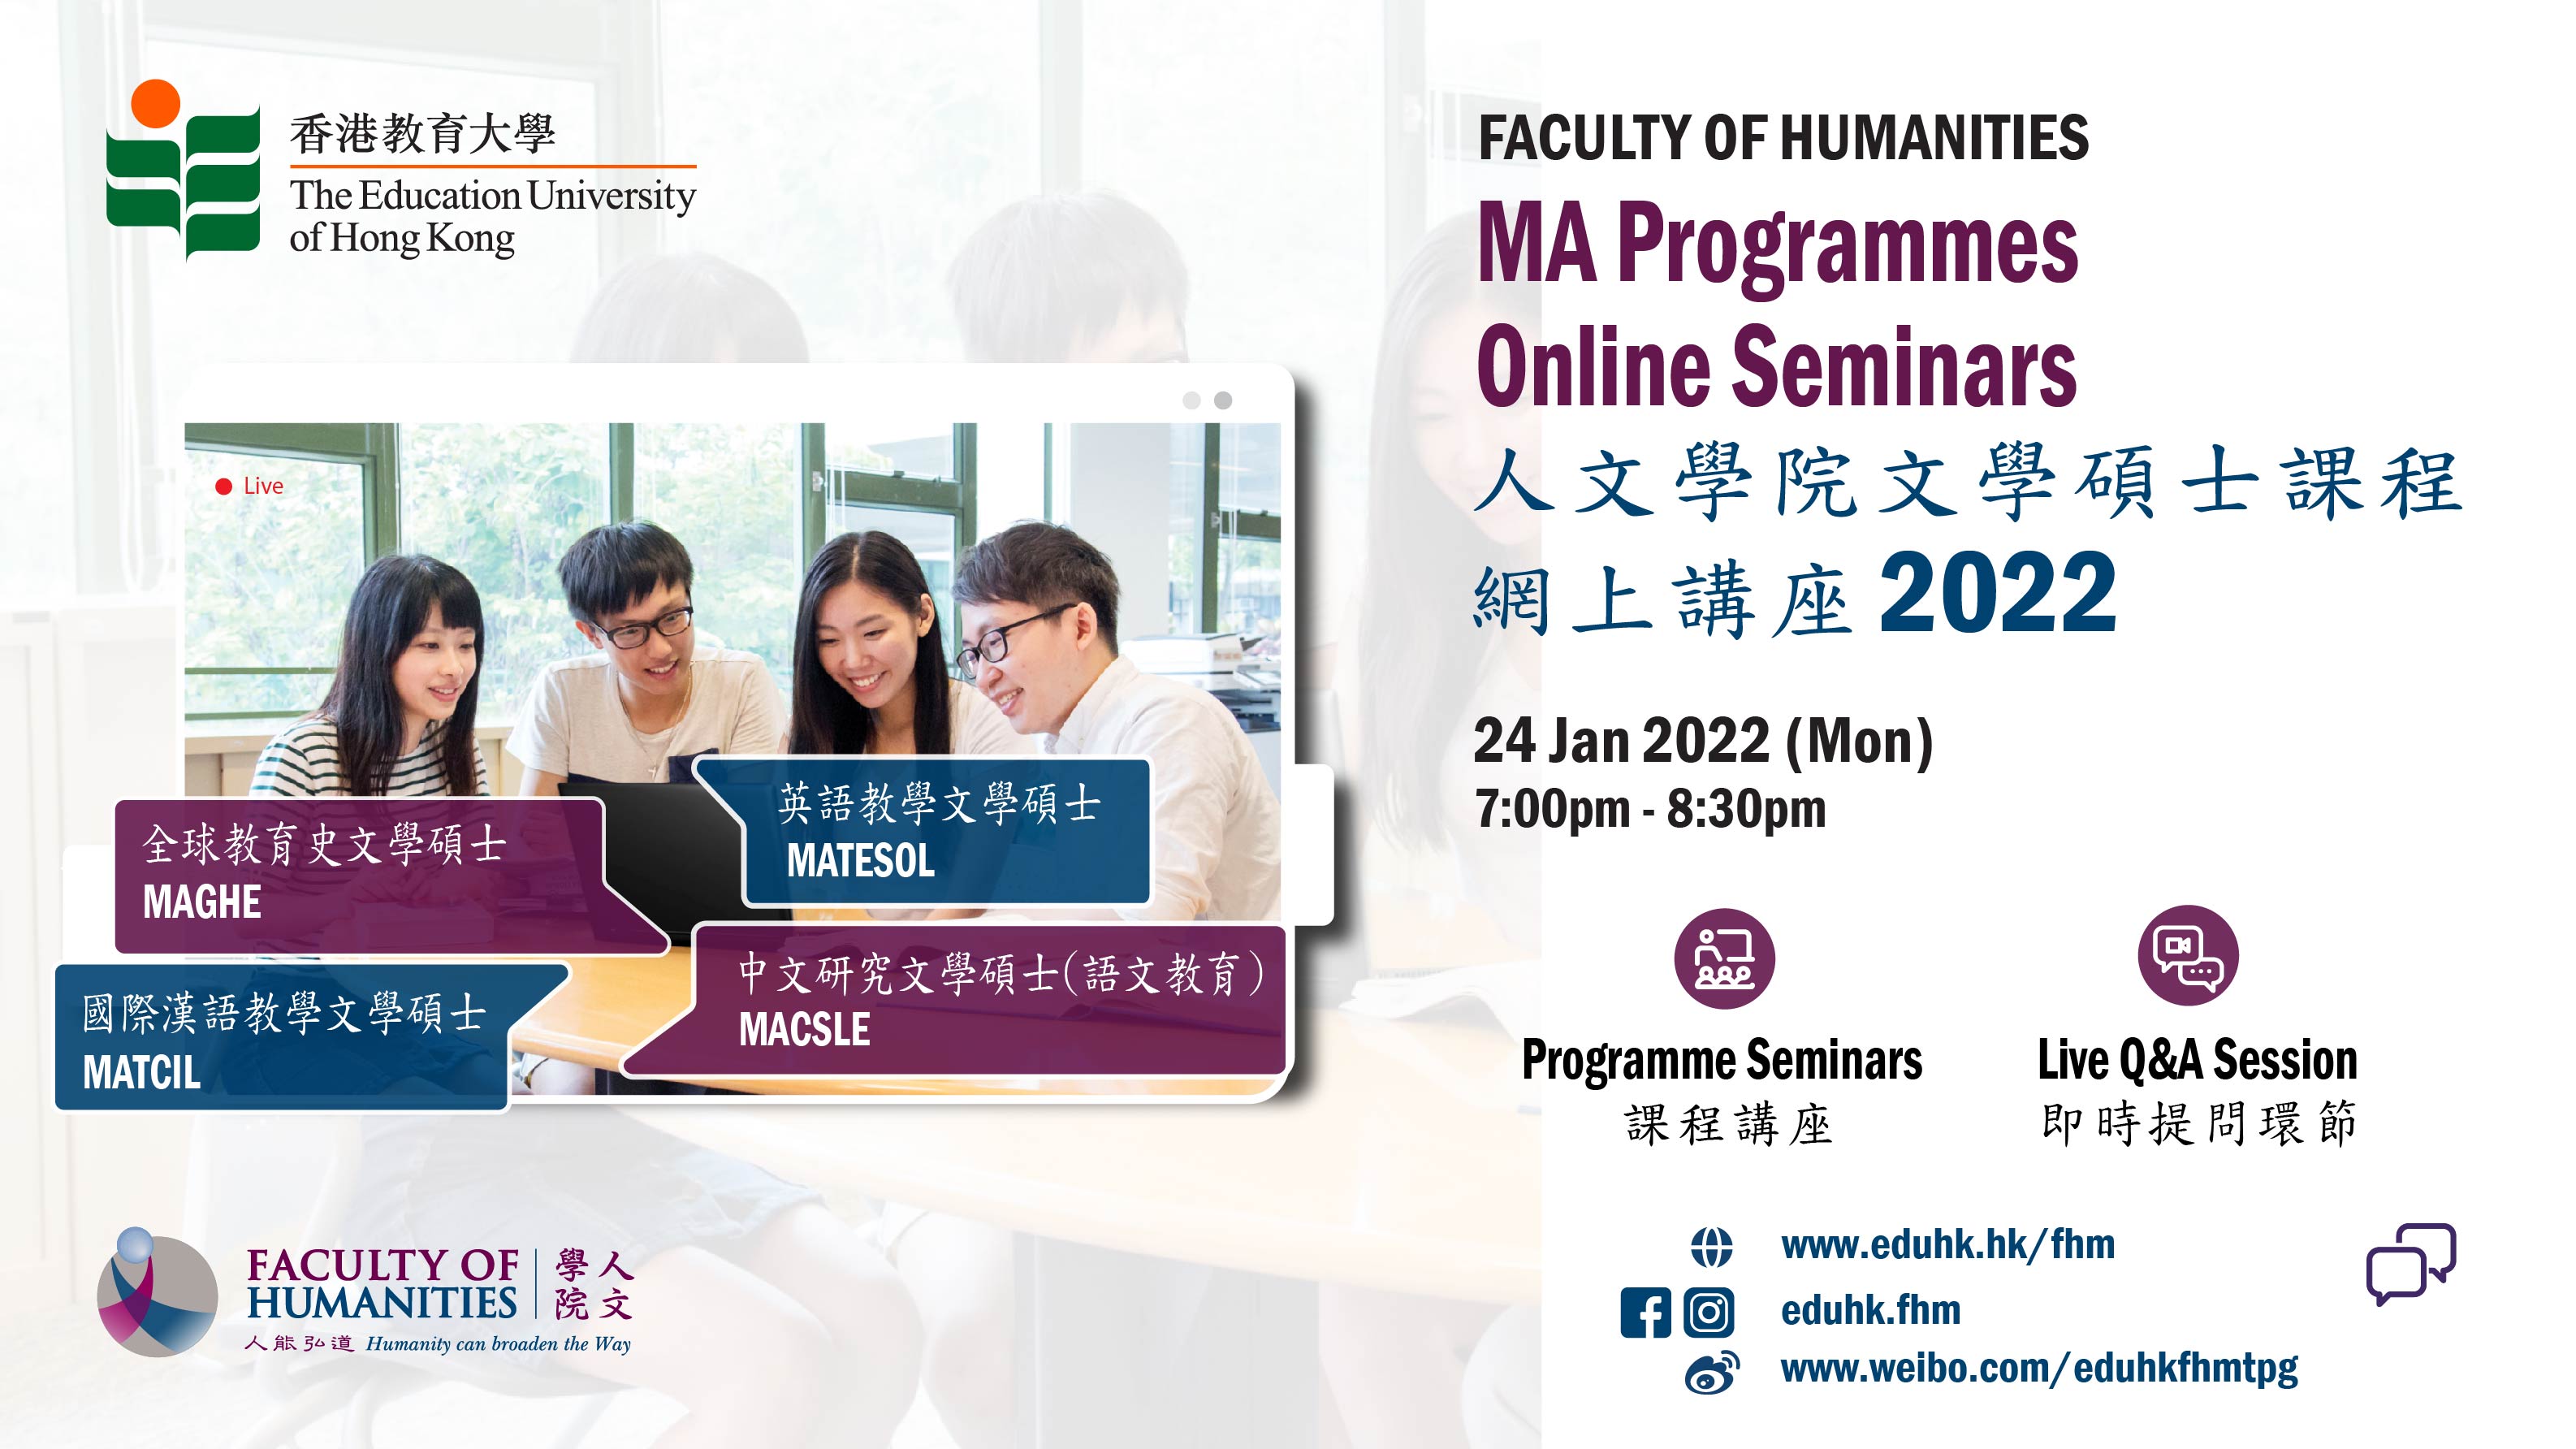 Faculty of Humanities - MA Programmes Online Seminars 2022